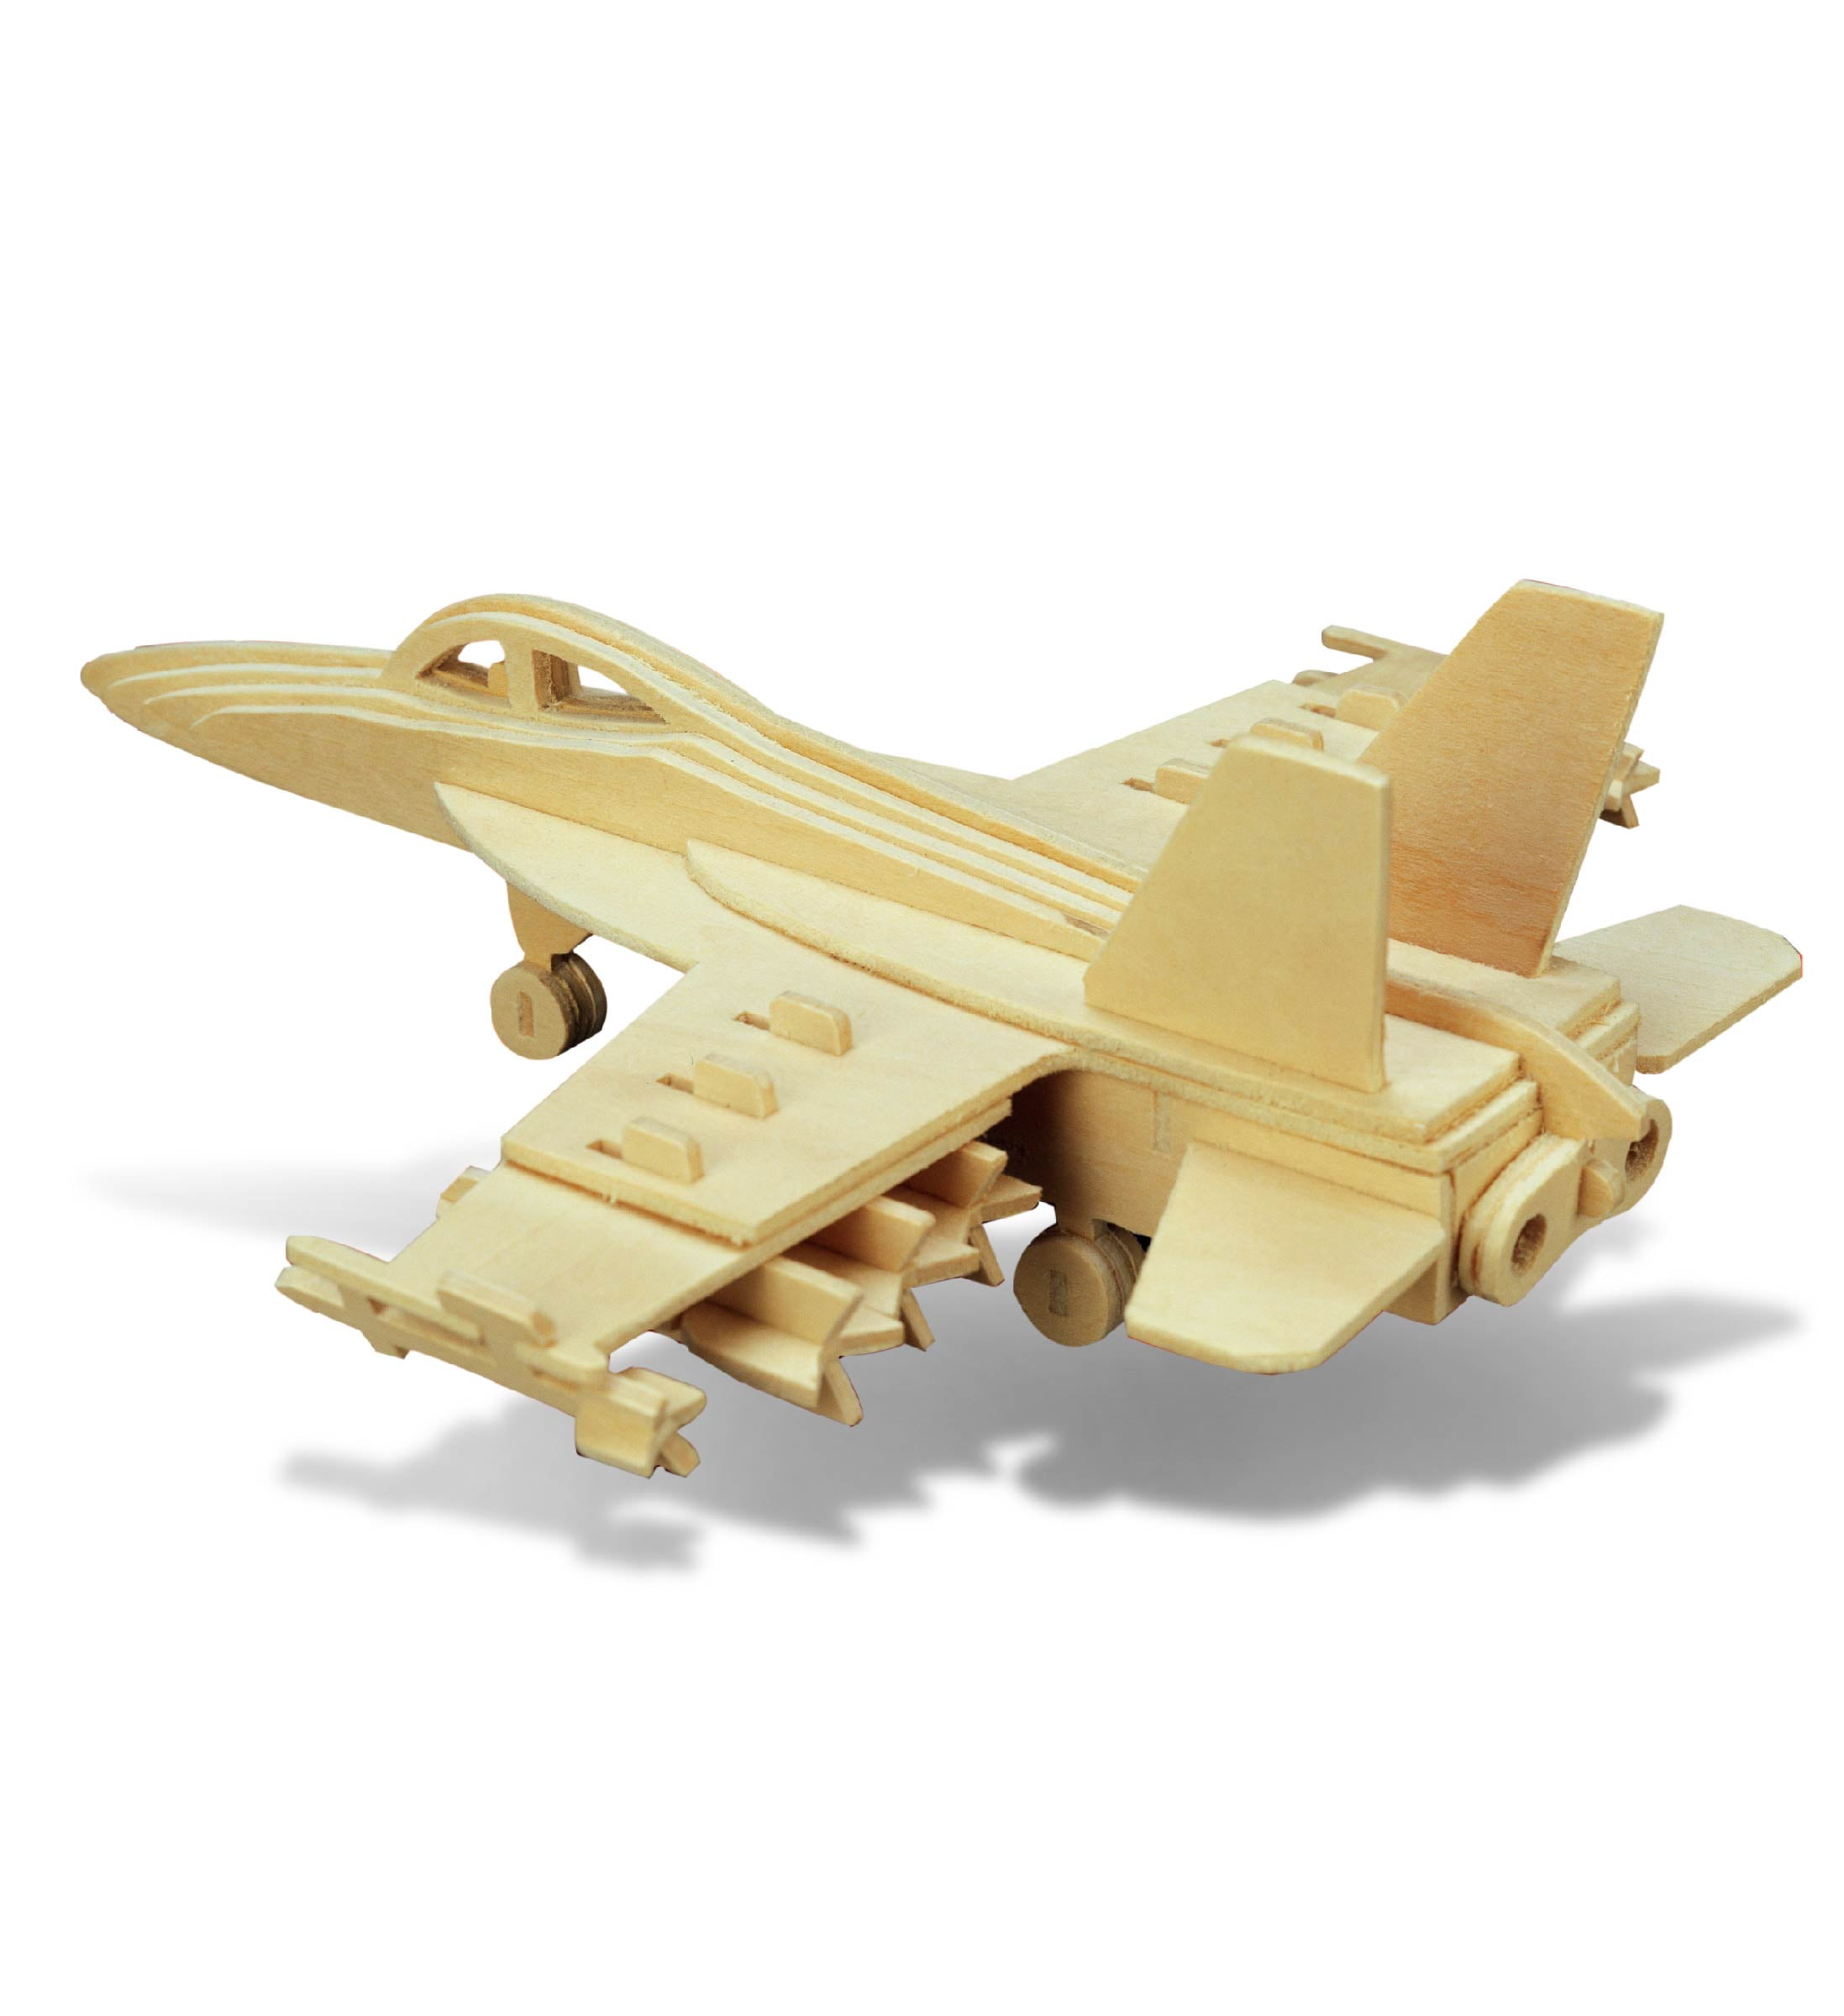 Details about   Truck Aircraft Assemble Toy Kids Gift Learning Educational DIY 3D Wooden Model 